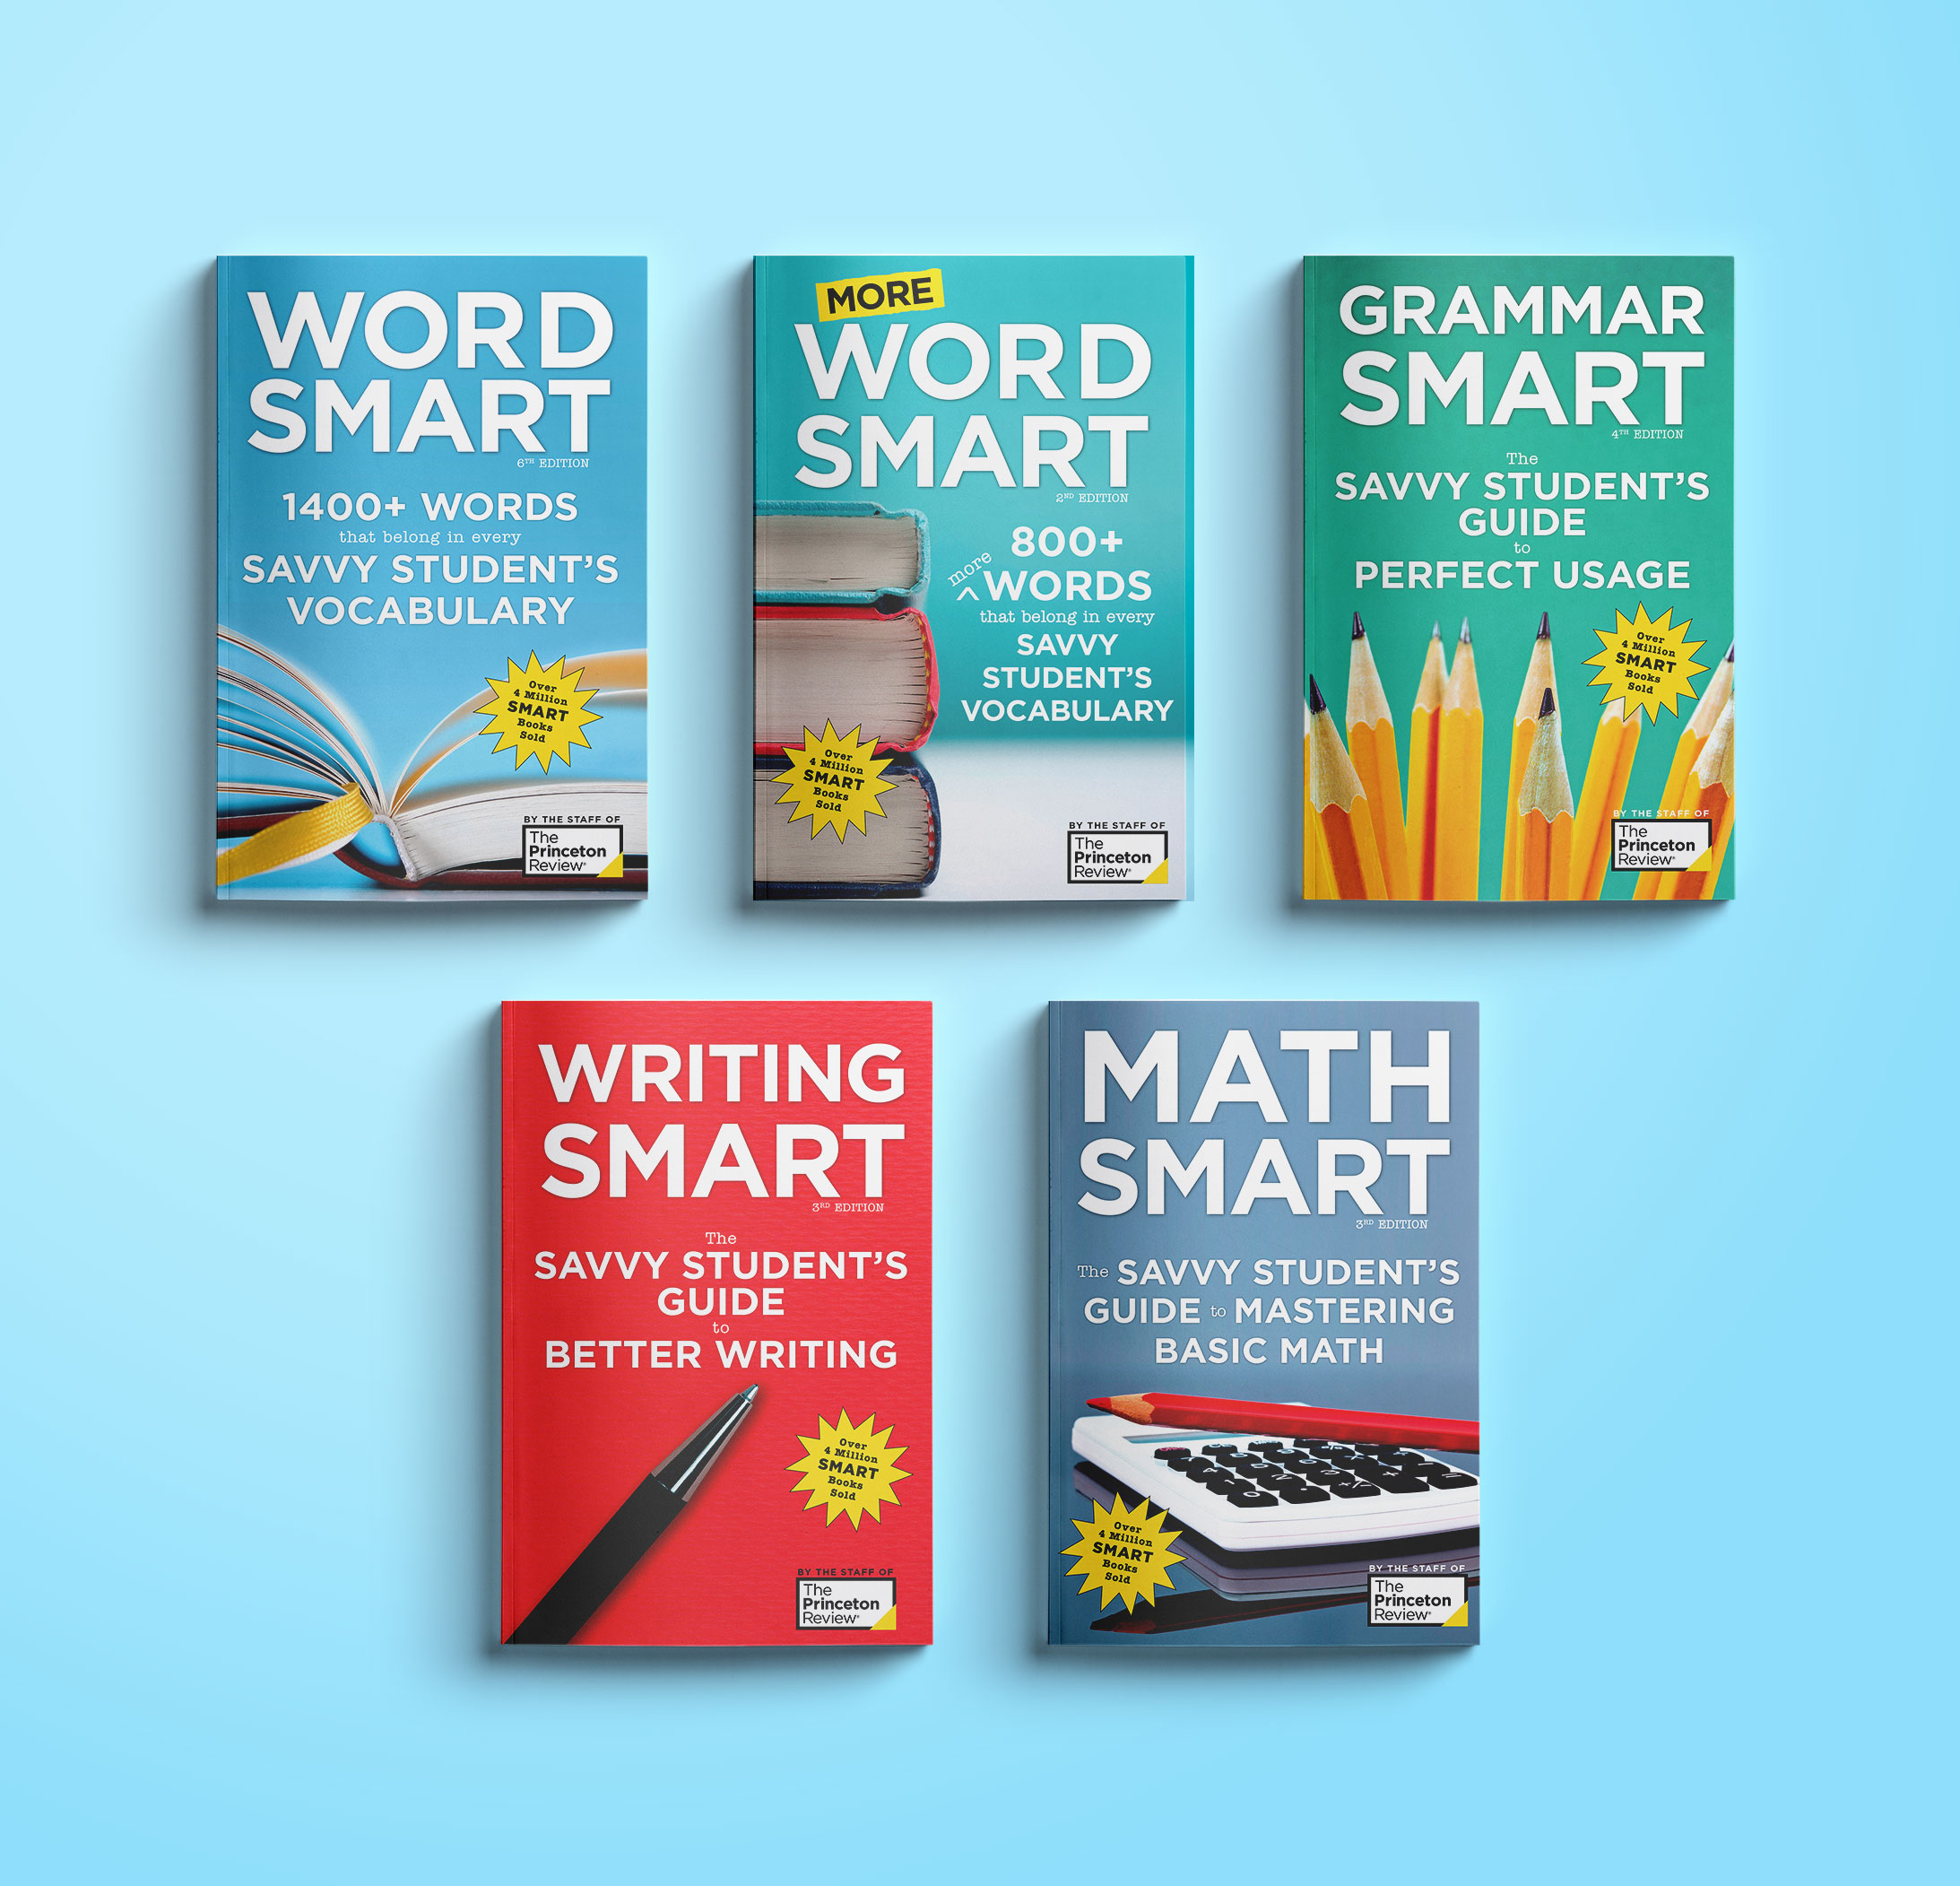 Grammar Smart, 4th Edition: The by The Princeton Review